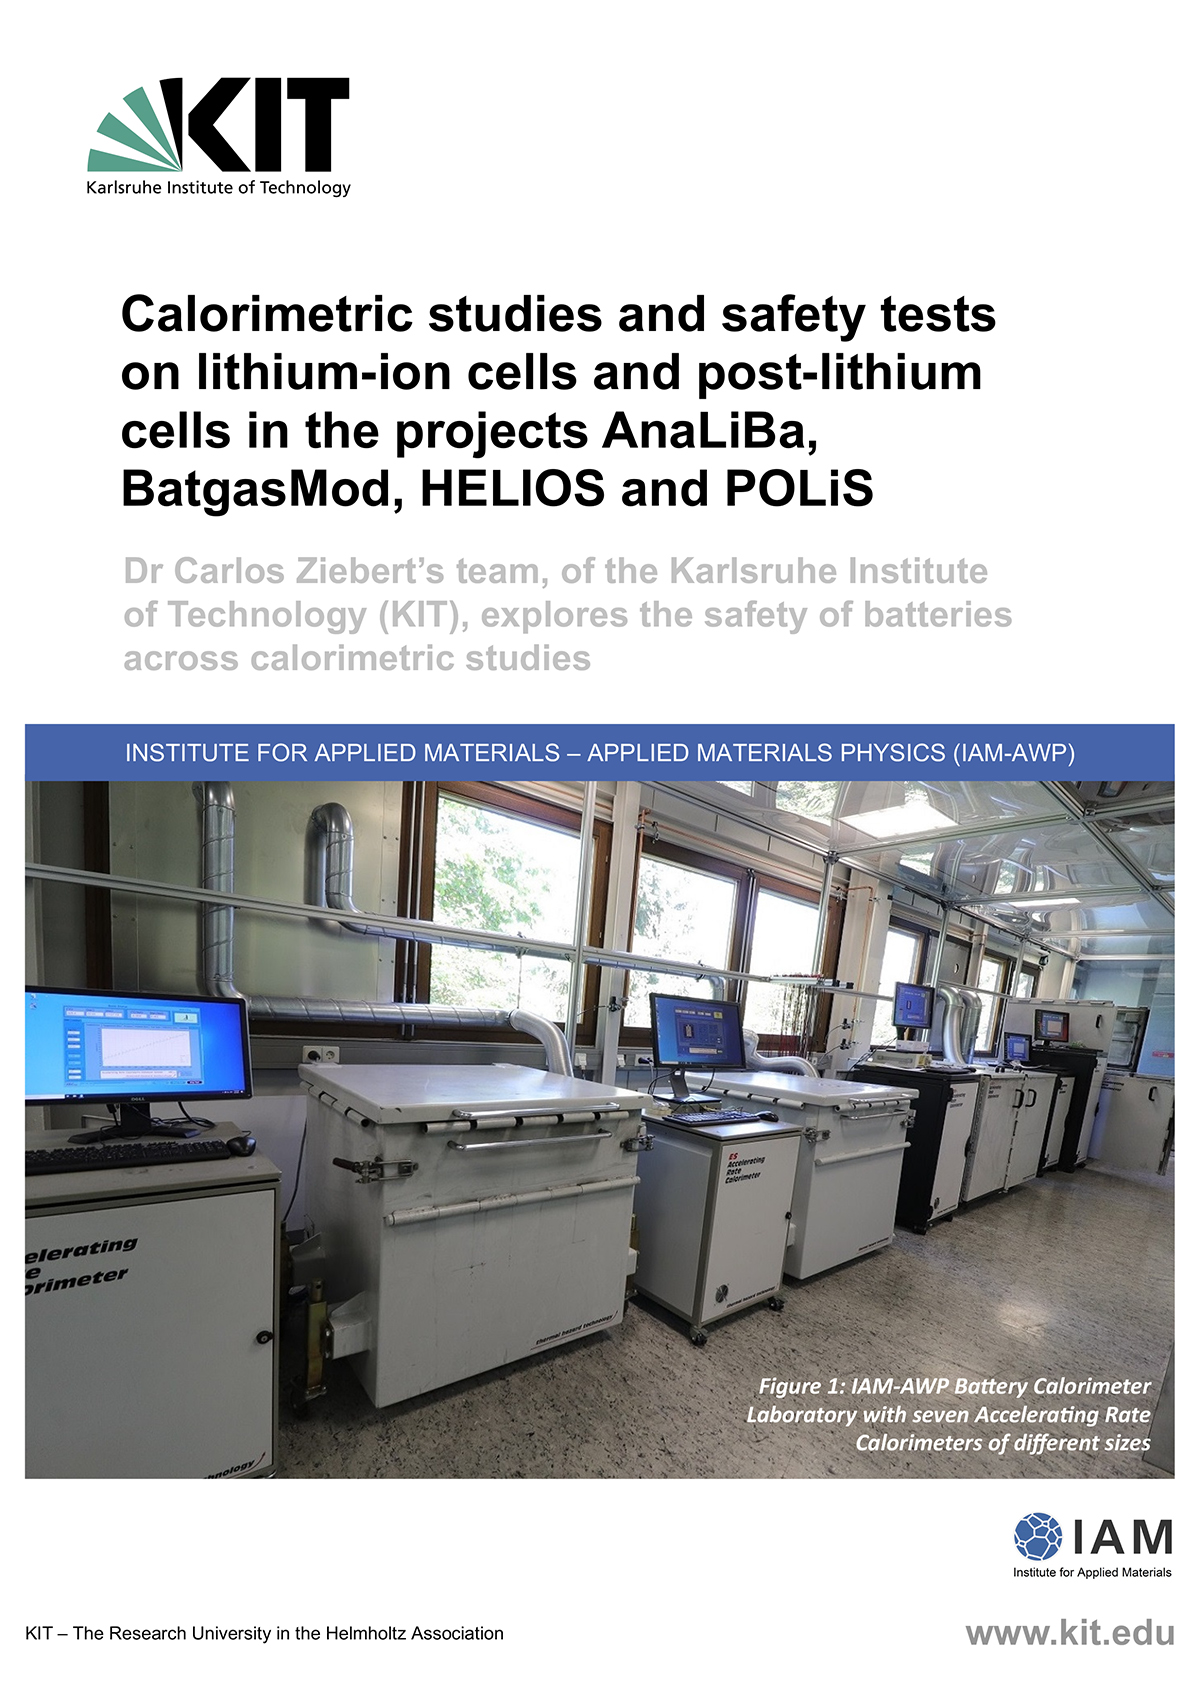 Caloimetric studies and safety tests on lithium-ion cells and post-lithium cells